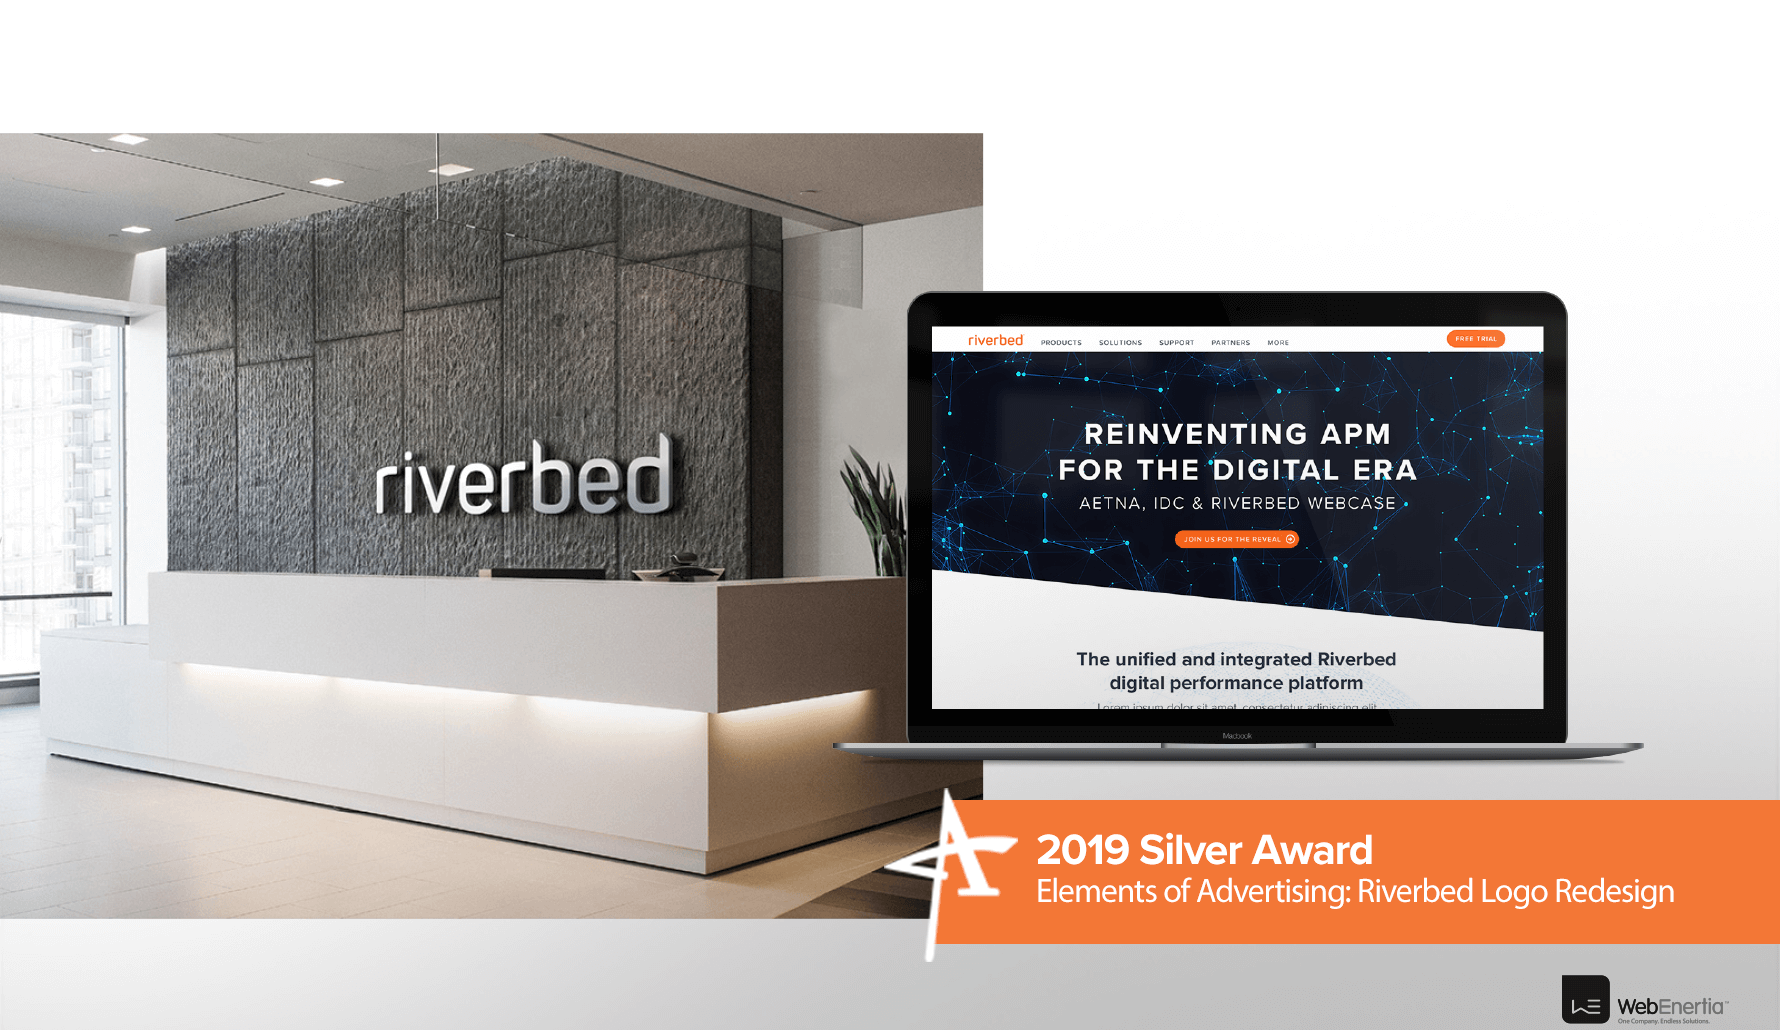 2019 Silver Addy Award - Elements of Advertising: Riverbed Logo Redesign